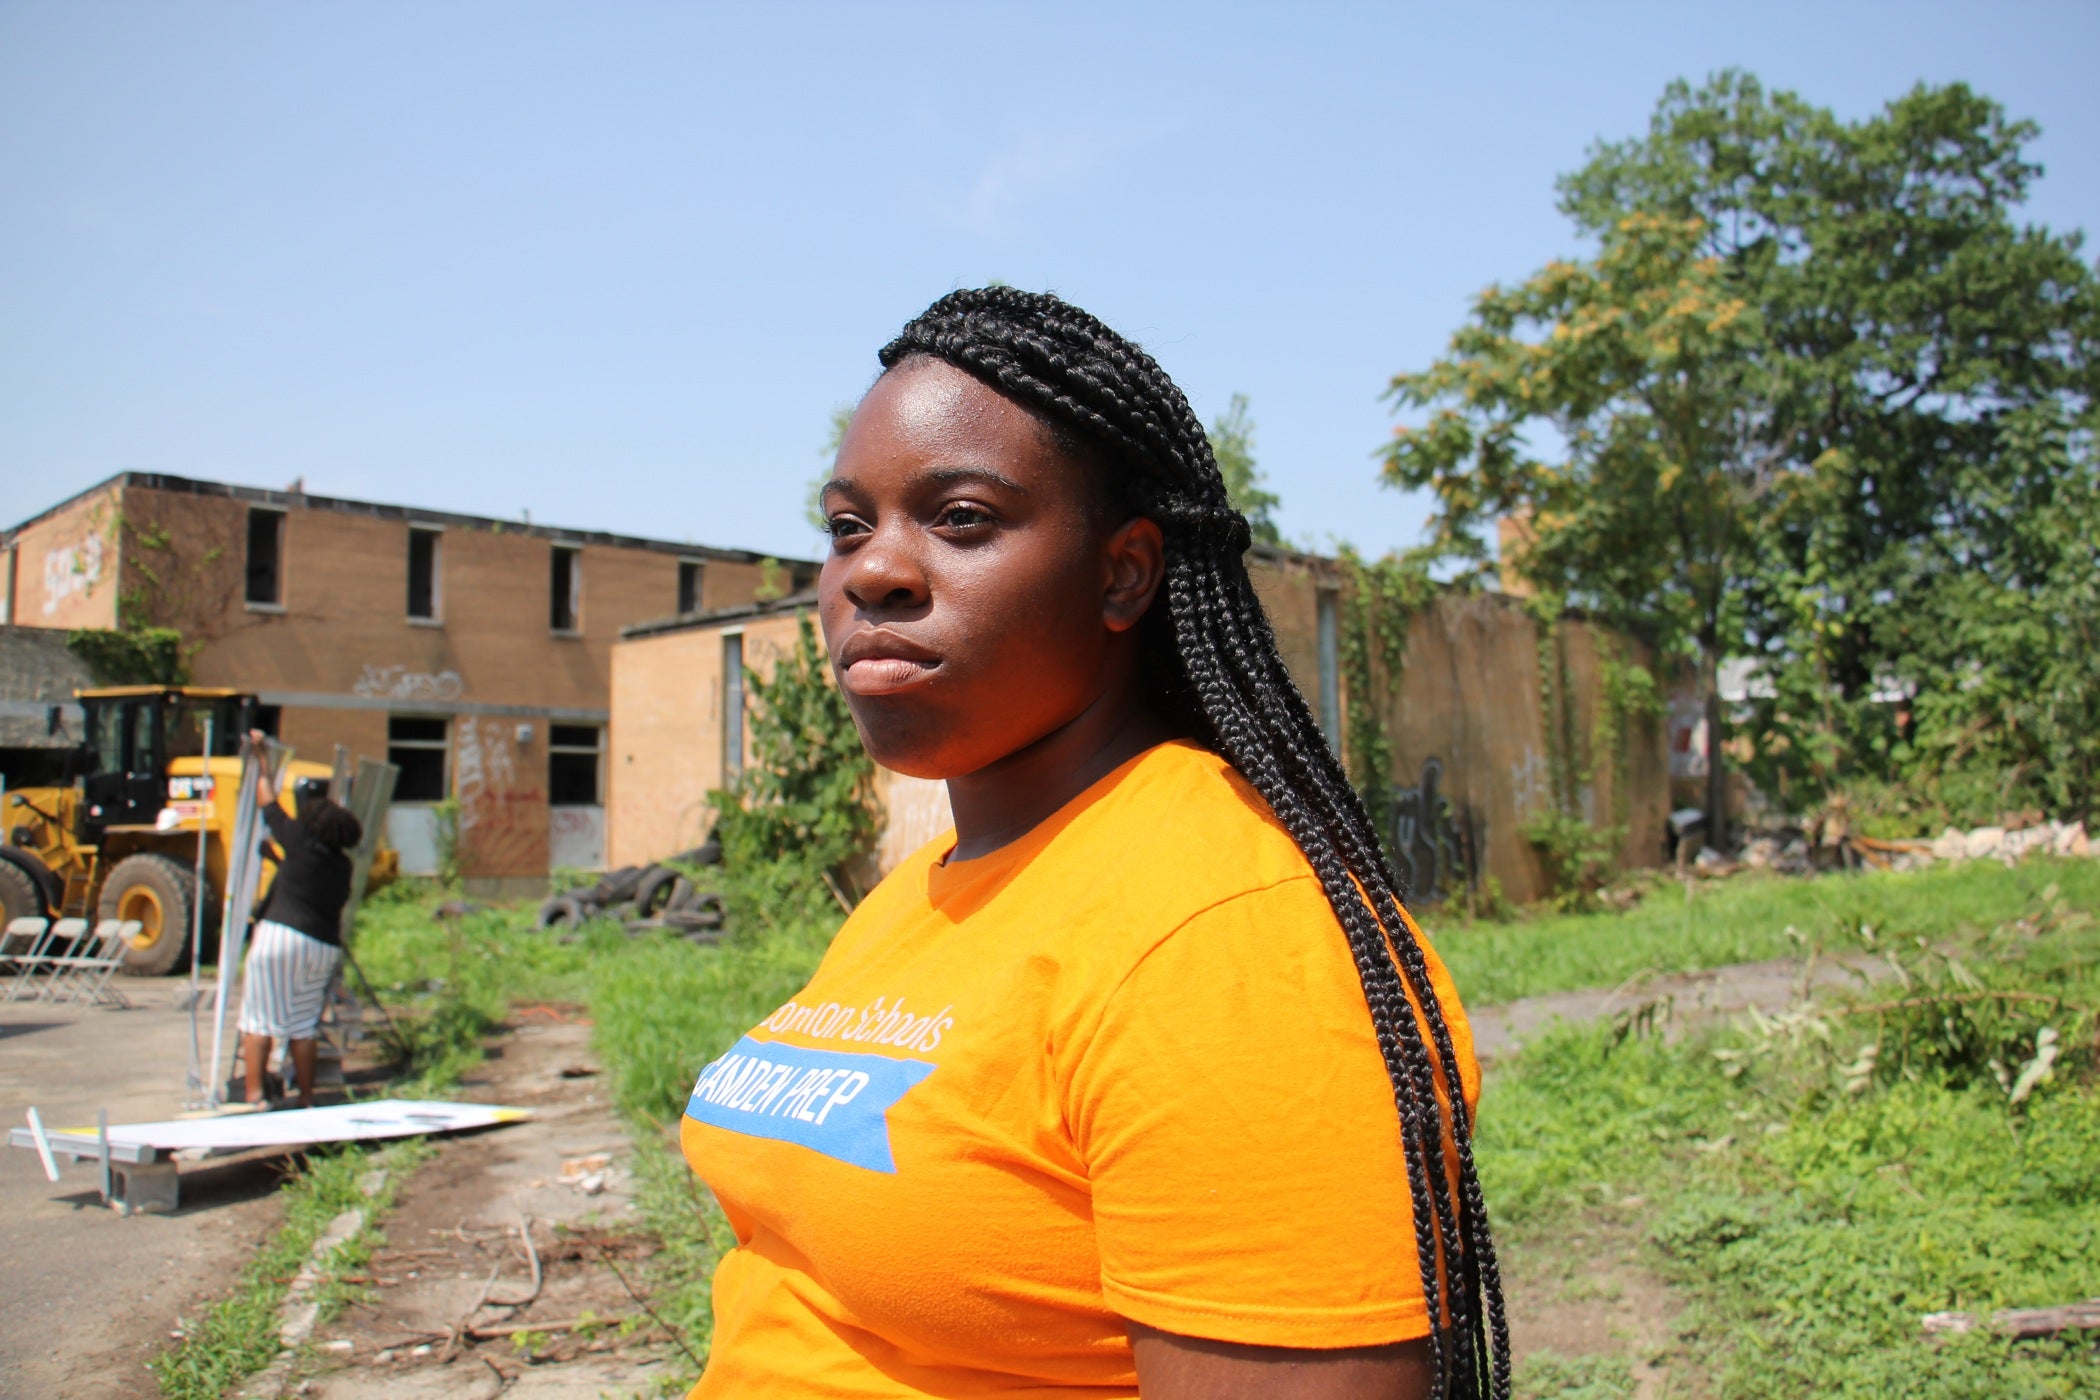 Camden resident Tiffani Queensbury looks forward to a day when the contaminated Camden Labs site will become an extension of Whitman Park. According to organizers, that could happen as early as next summer.